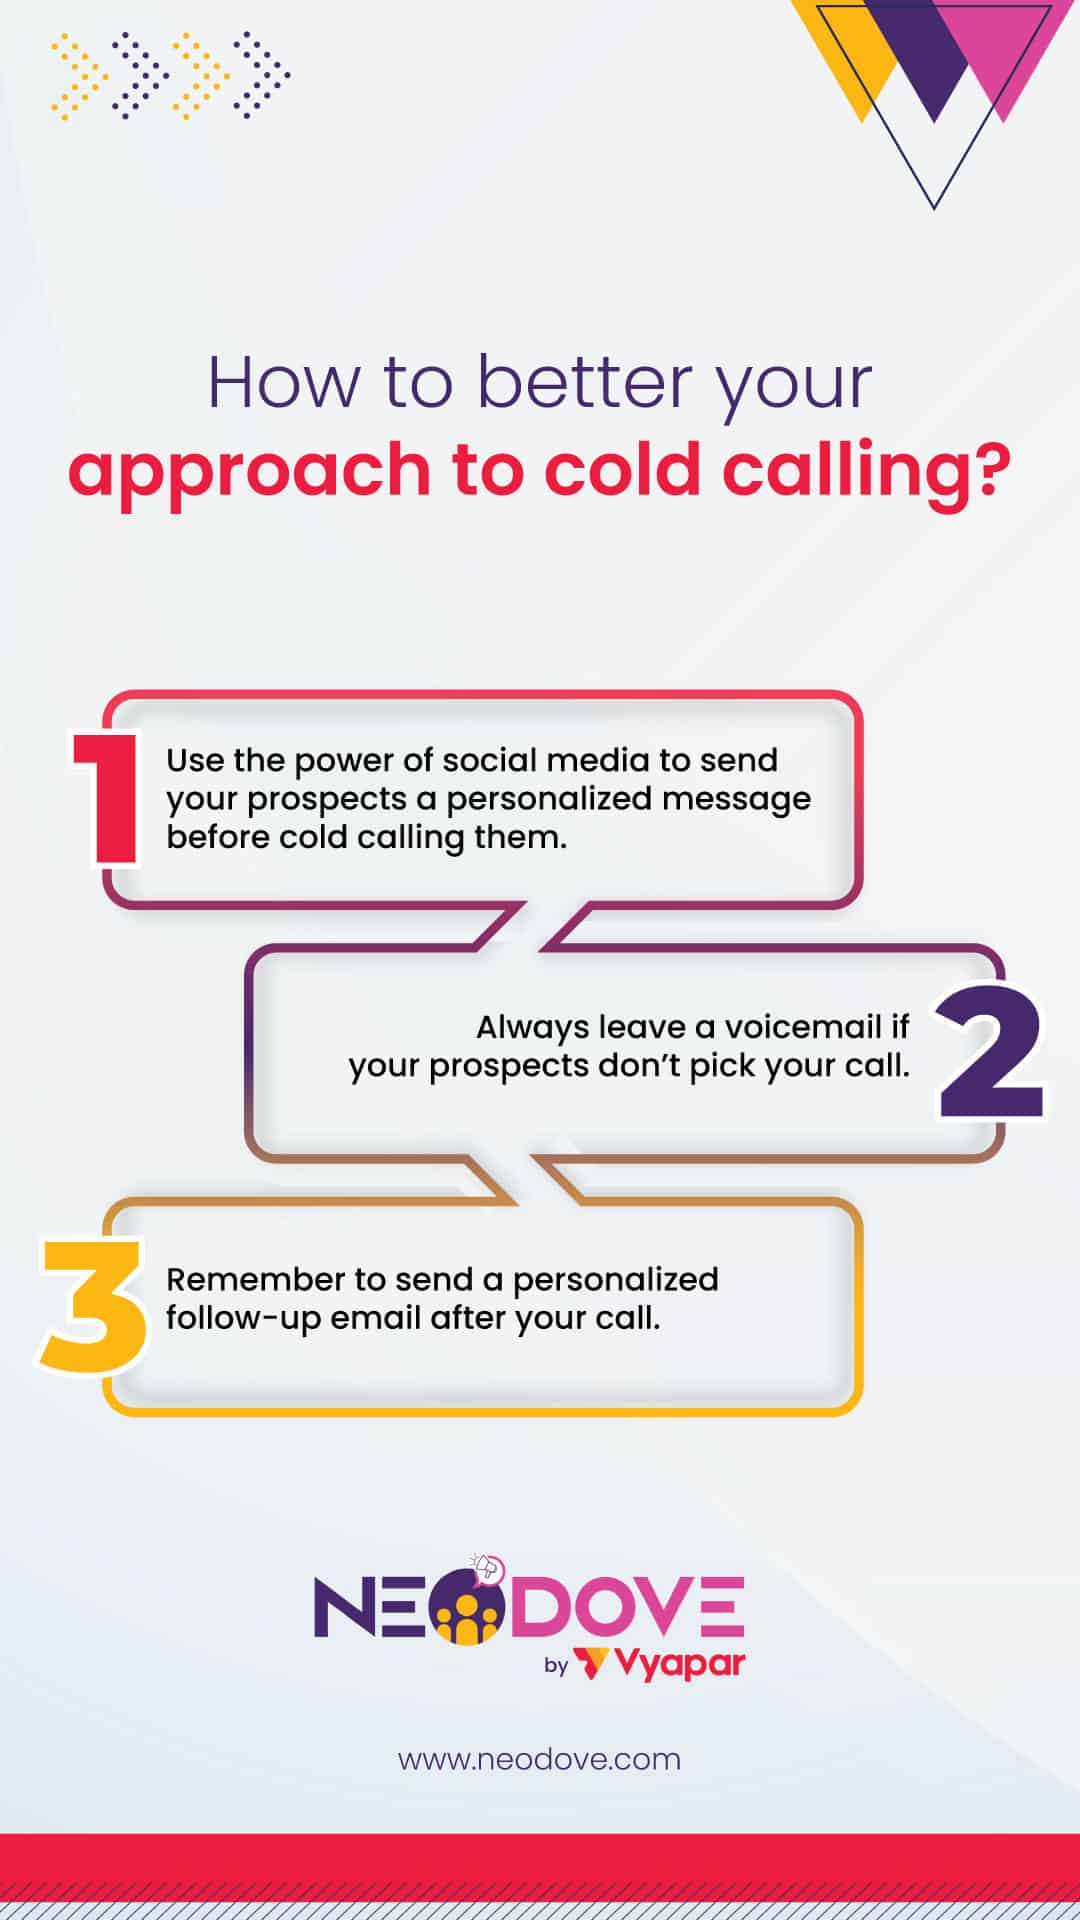 How to better your approach to cold calling - NeoDove